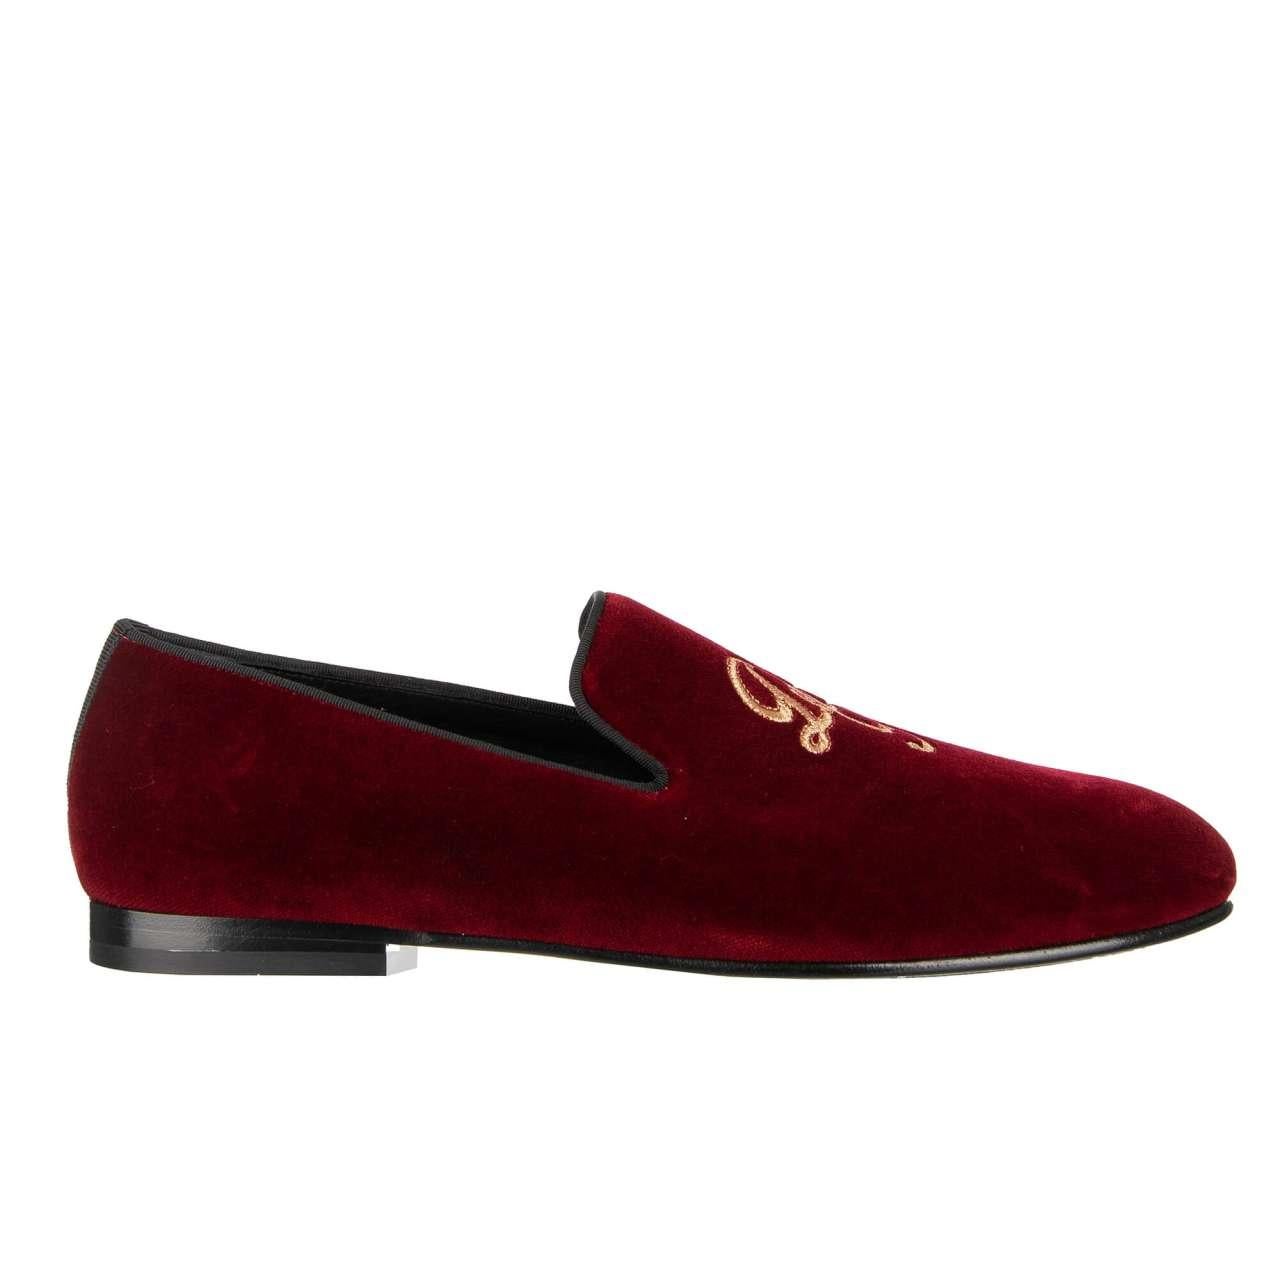 - Velvet loafer shoes AMALFI with embroidered golden DG logo in bordeaux red by DOLCE & GABBANA - MADE IN ITALY - Former RRP: EUR 595 - New with Box - Model: A50335-B9L43-80308 - Material: 89% Cotton, 10% Viscose, 1% Elastan - Sole: Leather - Color: